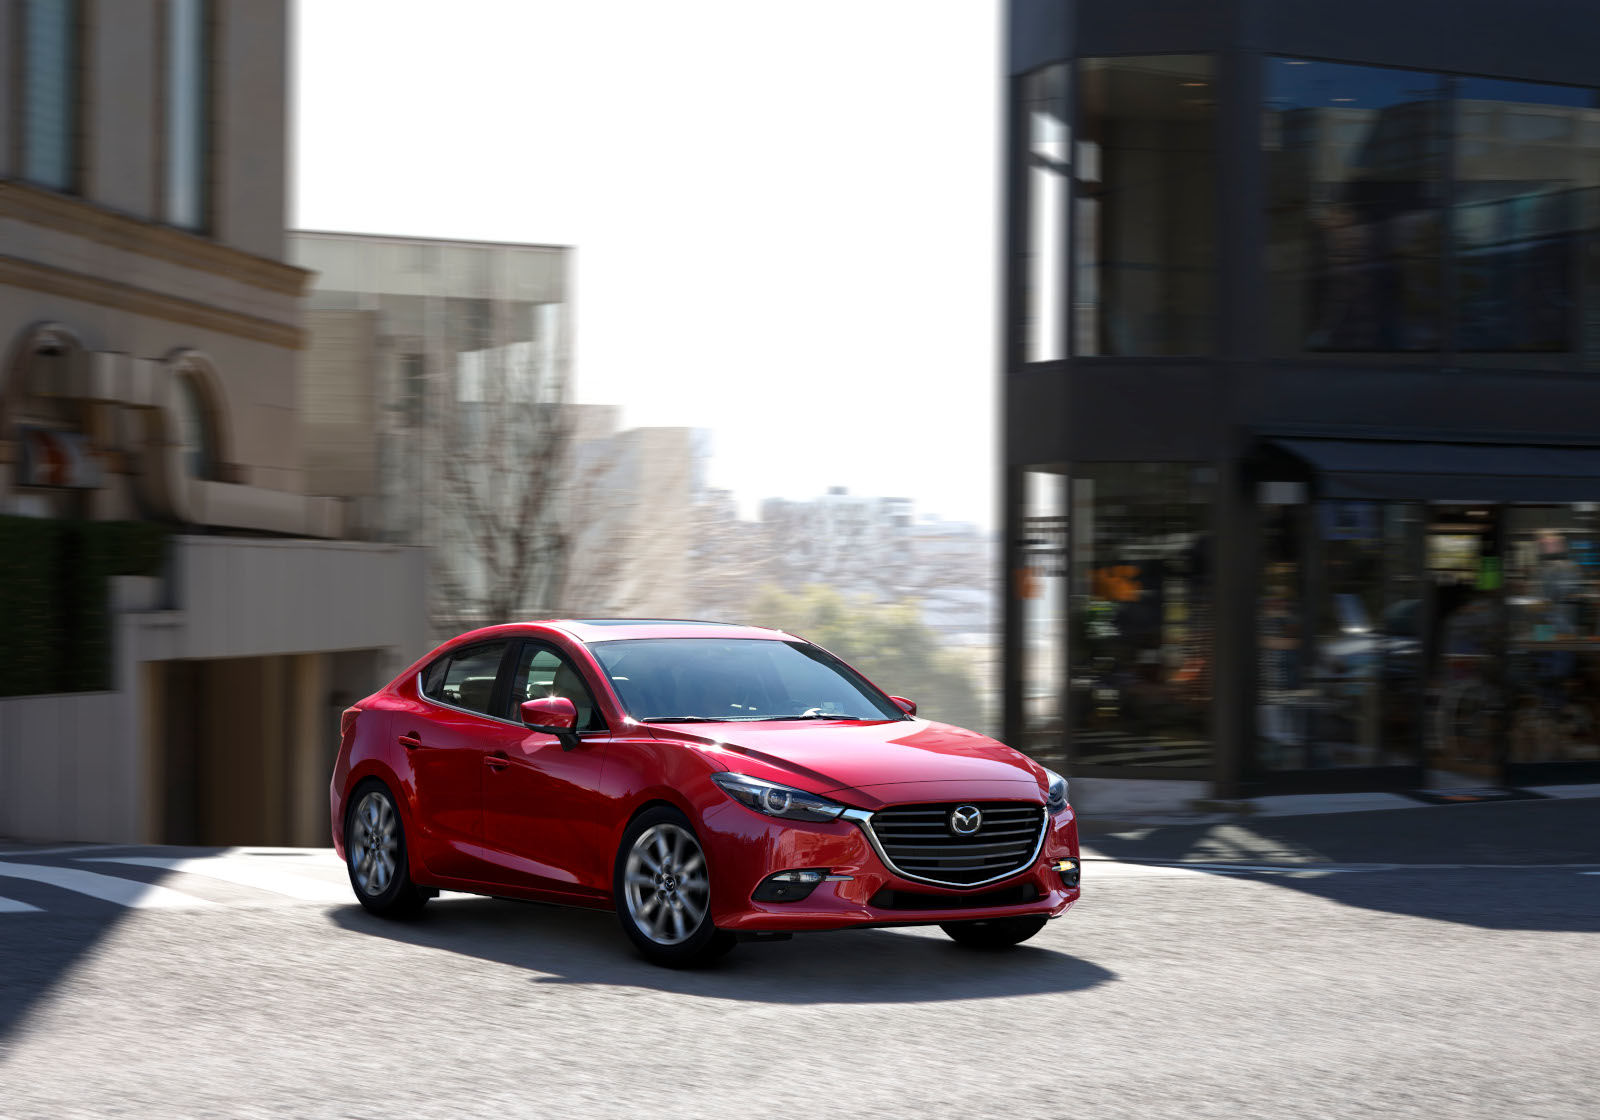 Three Reasons to Buy a Pre-Owned Mazda 3